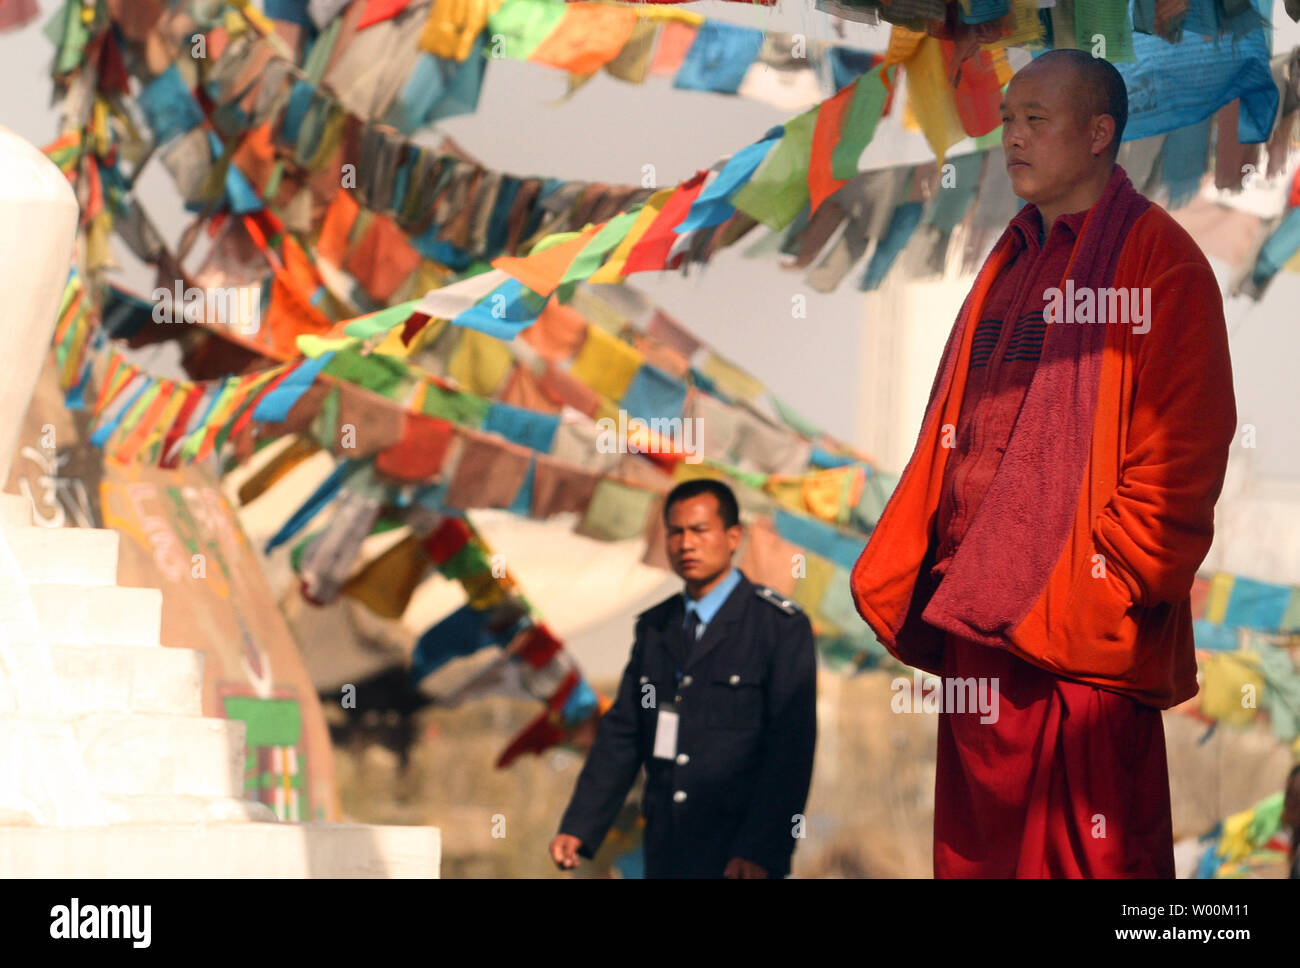 Watched by security, a monk, on hire, works at a replica of an Altar Temple in Lhasa, Tibet which represents one part of the 56 ethnic groups showcased by Han Chinese in Beijing's China Nationalities Museum, or Chinese Ethnic Cultural Park, March 15, 2009. China accused the U.S. Congress last week of damaging relations and meddling in China's internal affairs by passing a resolution recognizing the plight of Tibet's people and their exiled spiritual leader, the Dalai Lama. (UPI Photo/Stephen Shaver) Stock Photo